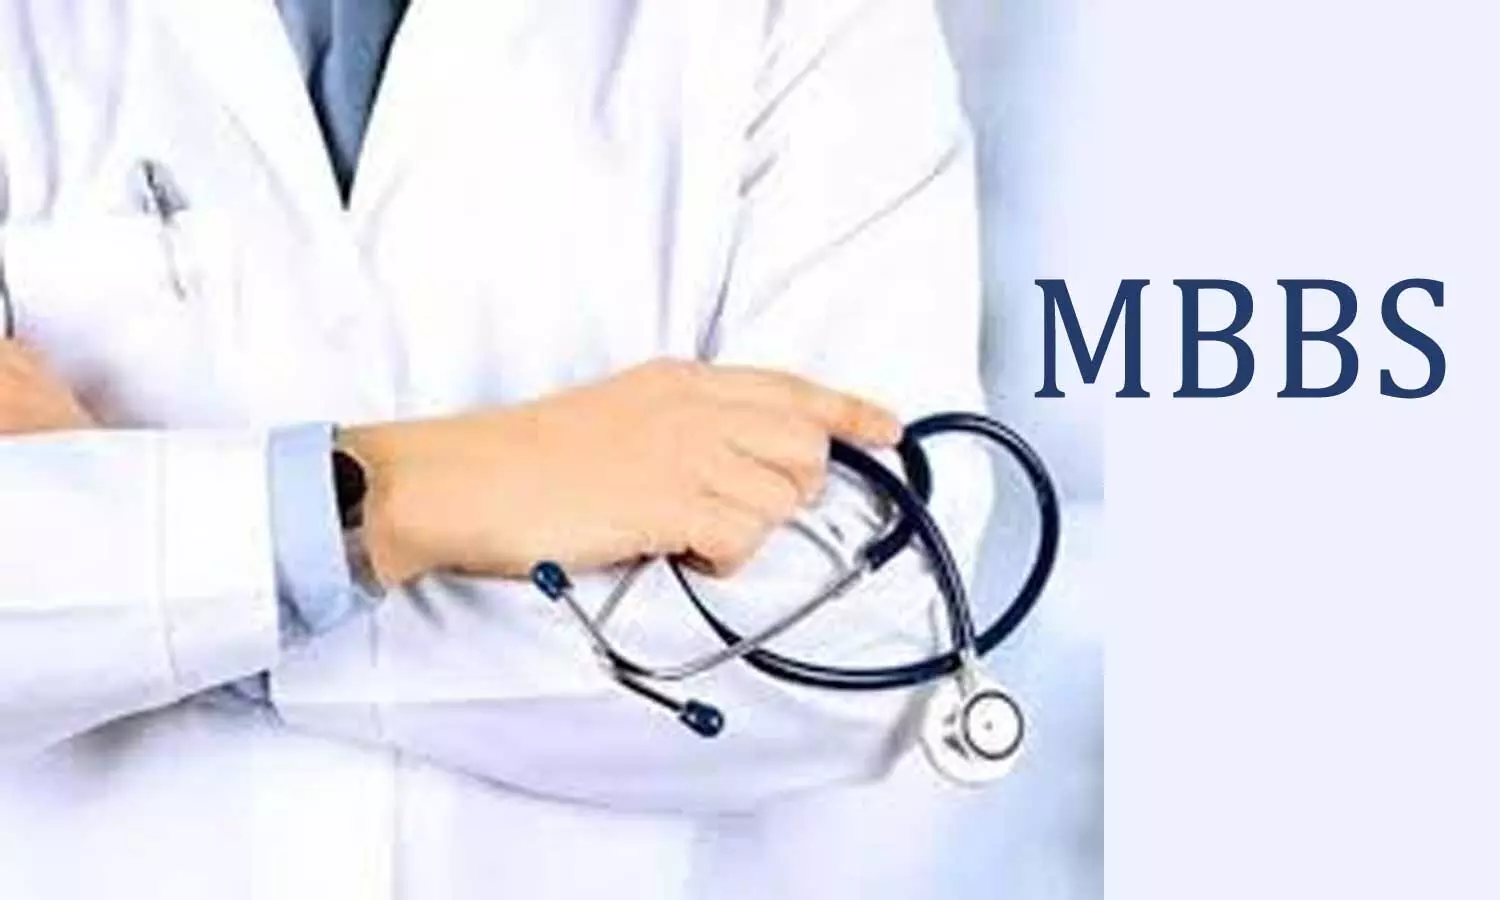 Introduce forensic study, training in MBBS course: NHRC